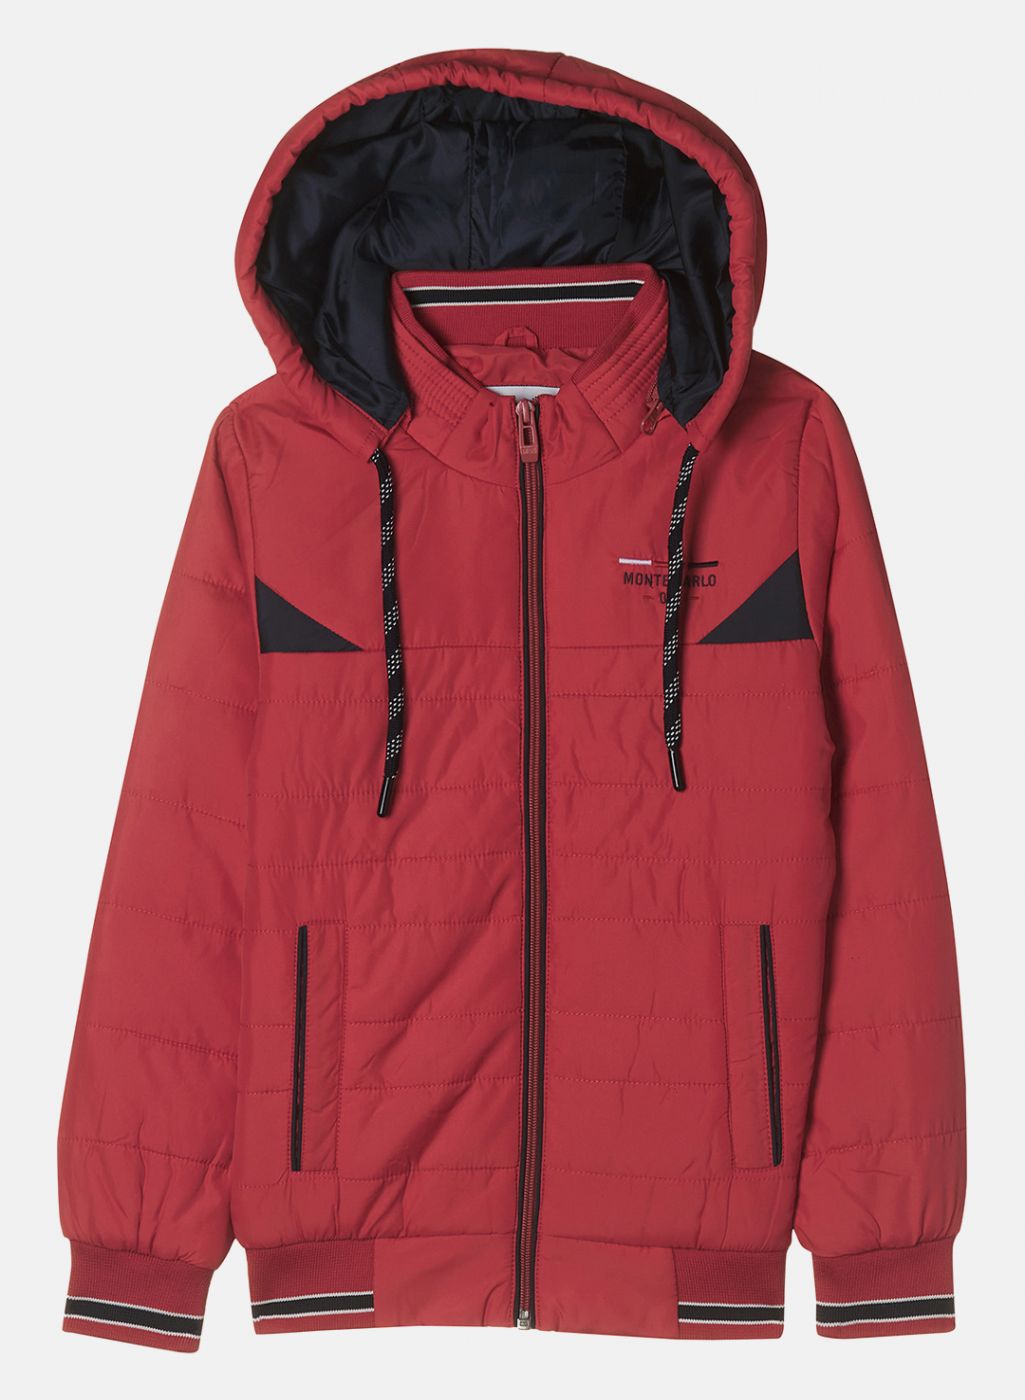 Boys Red Solid Jacket